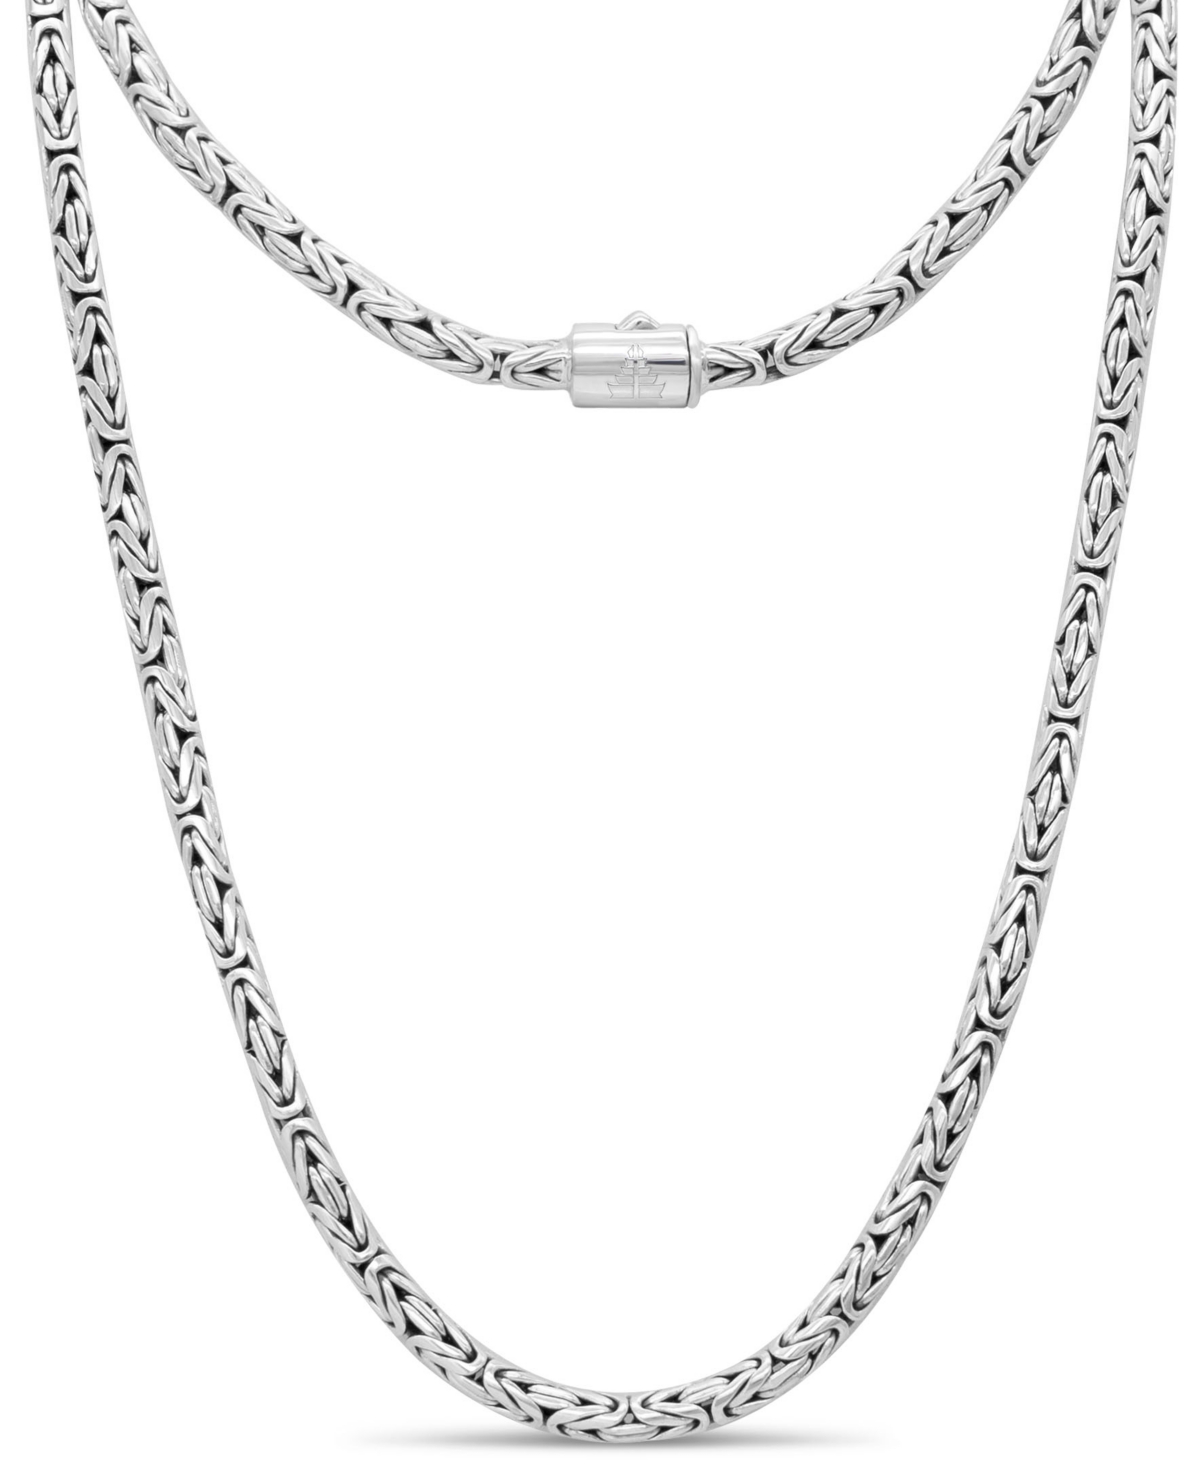 Borobudur Round 4mm Chain Necklace in Sterling Silver - Silver